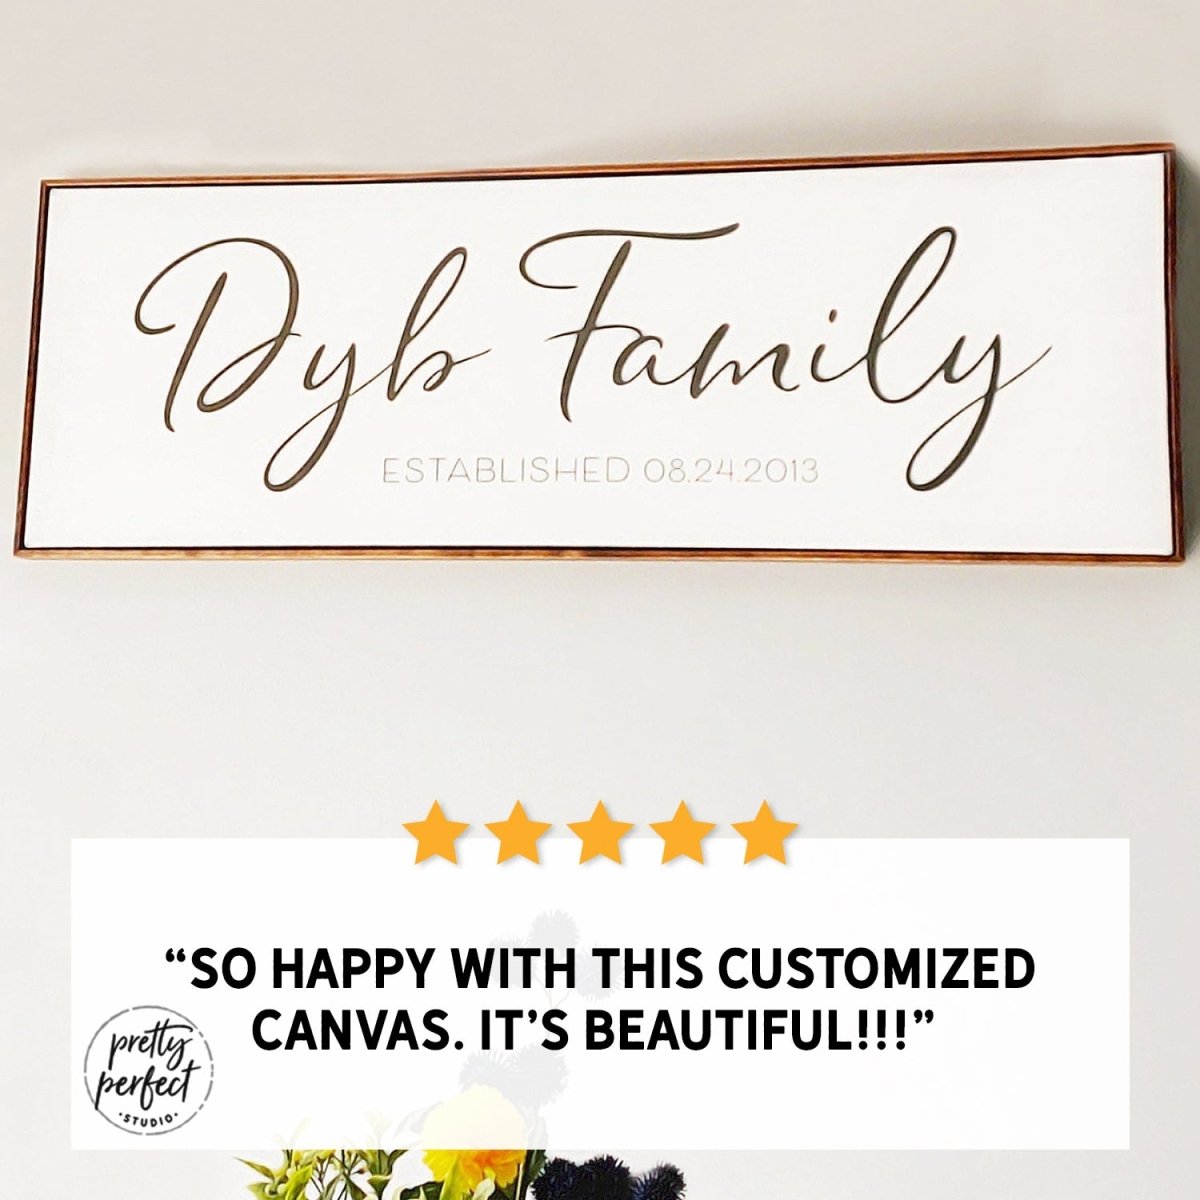 Customer product review for custom family name wall art by Pretty Perfect Studio